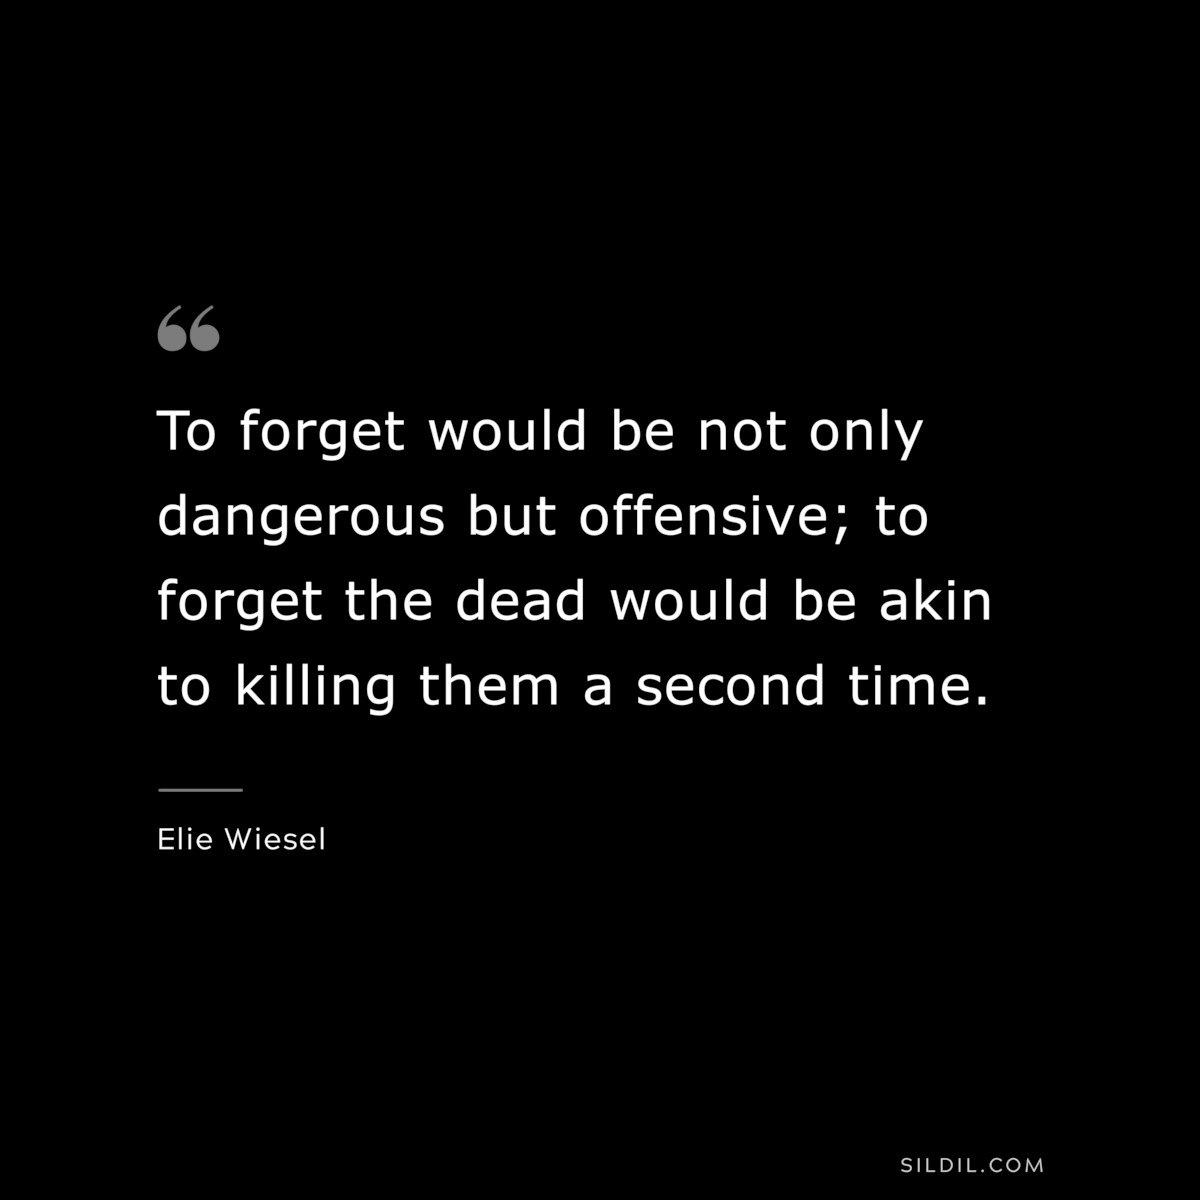 To forget would be not only dangerous but offensive; to forget the dead would be akin to killing them a second time. ― Elie Wiesel